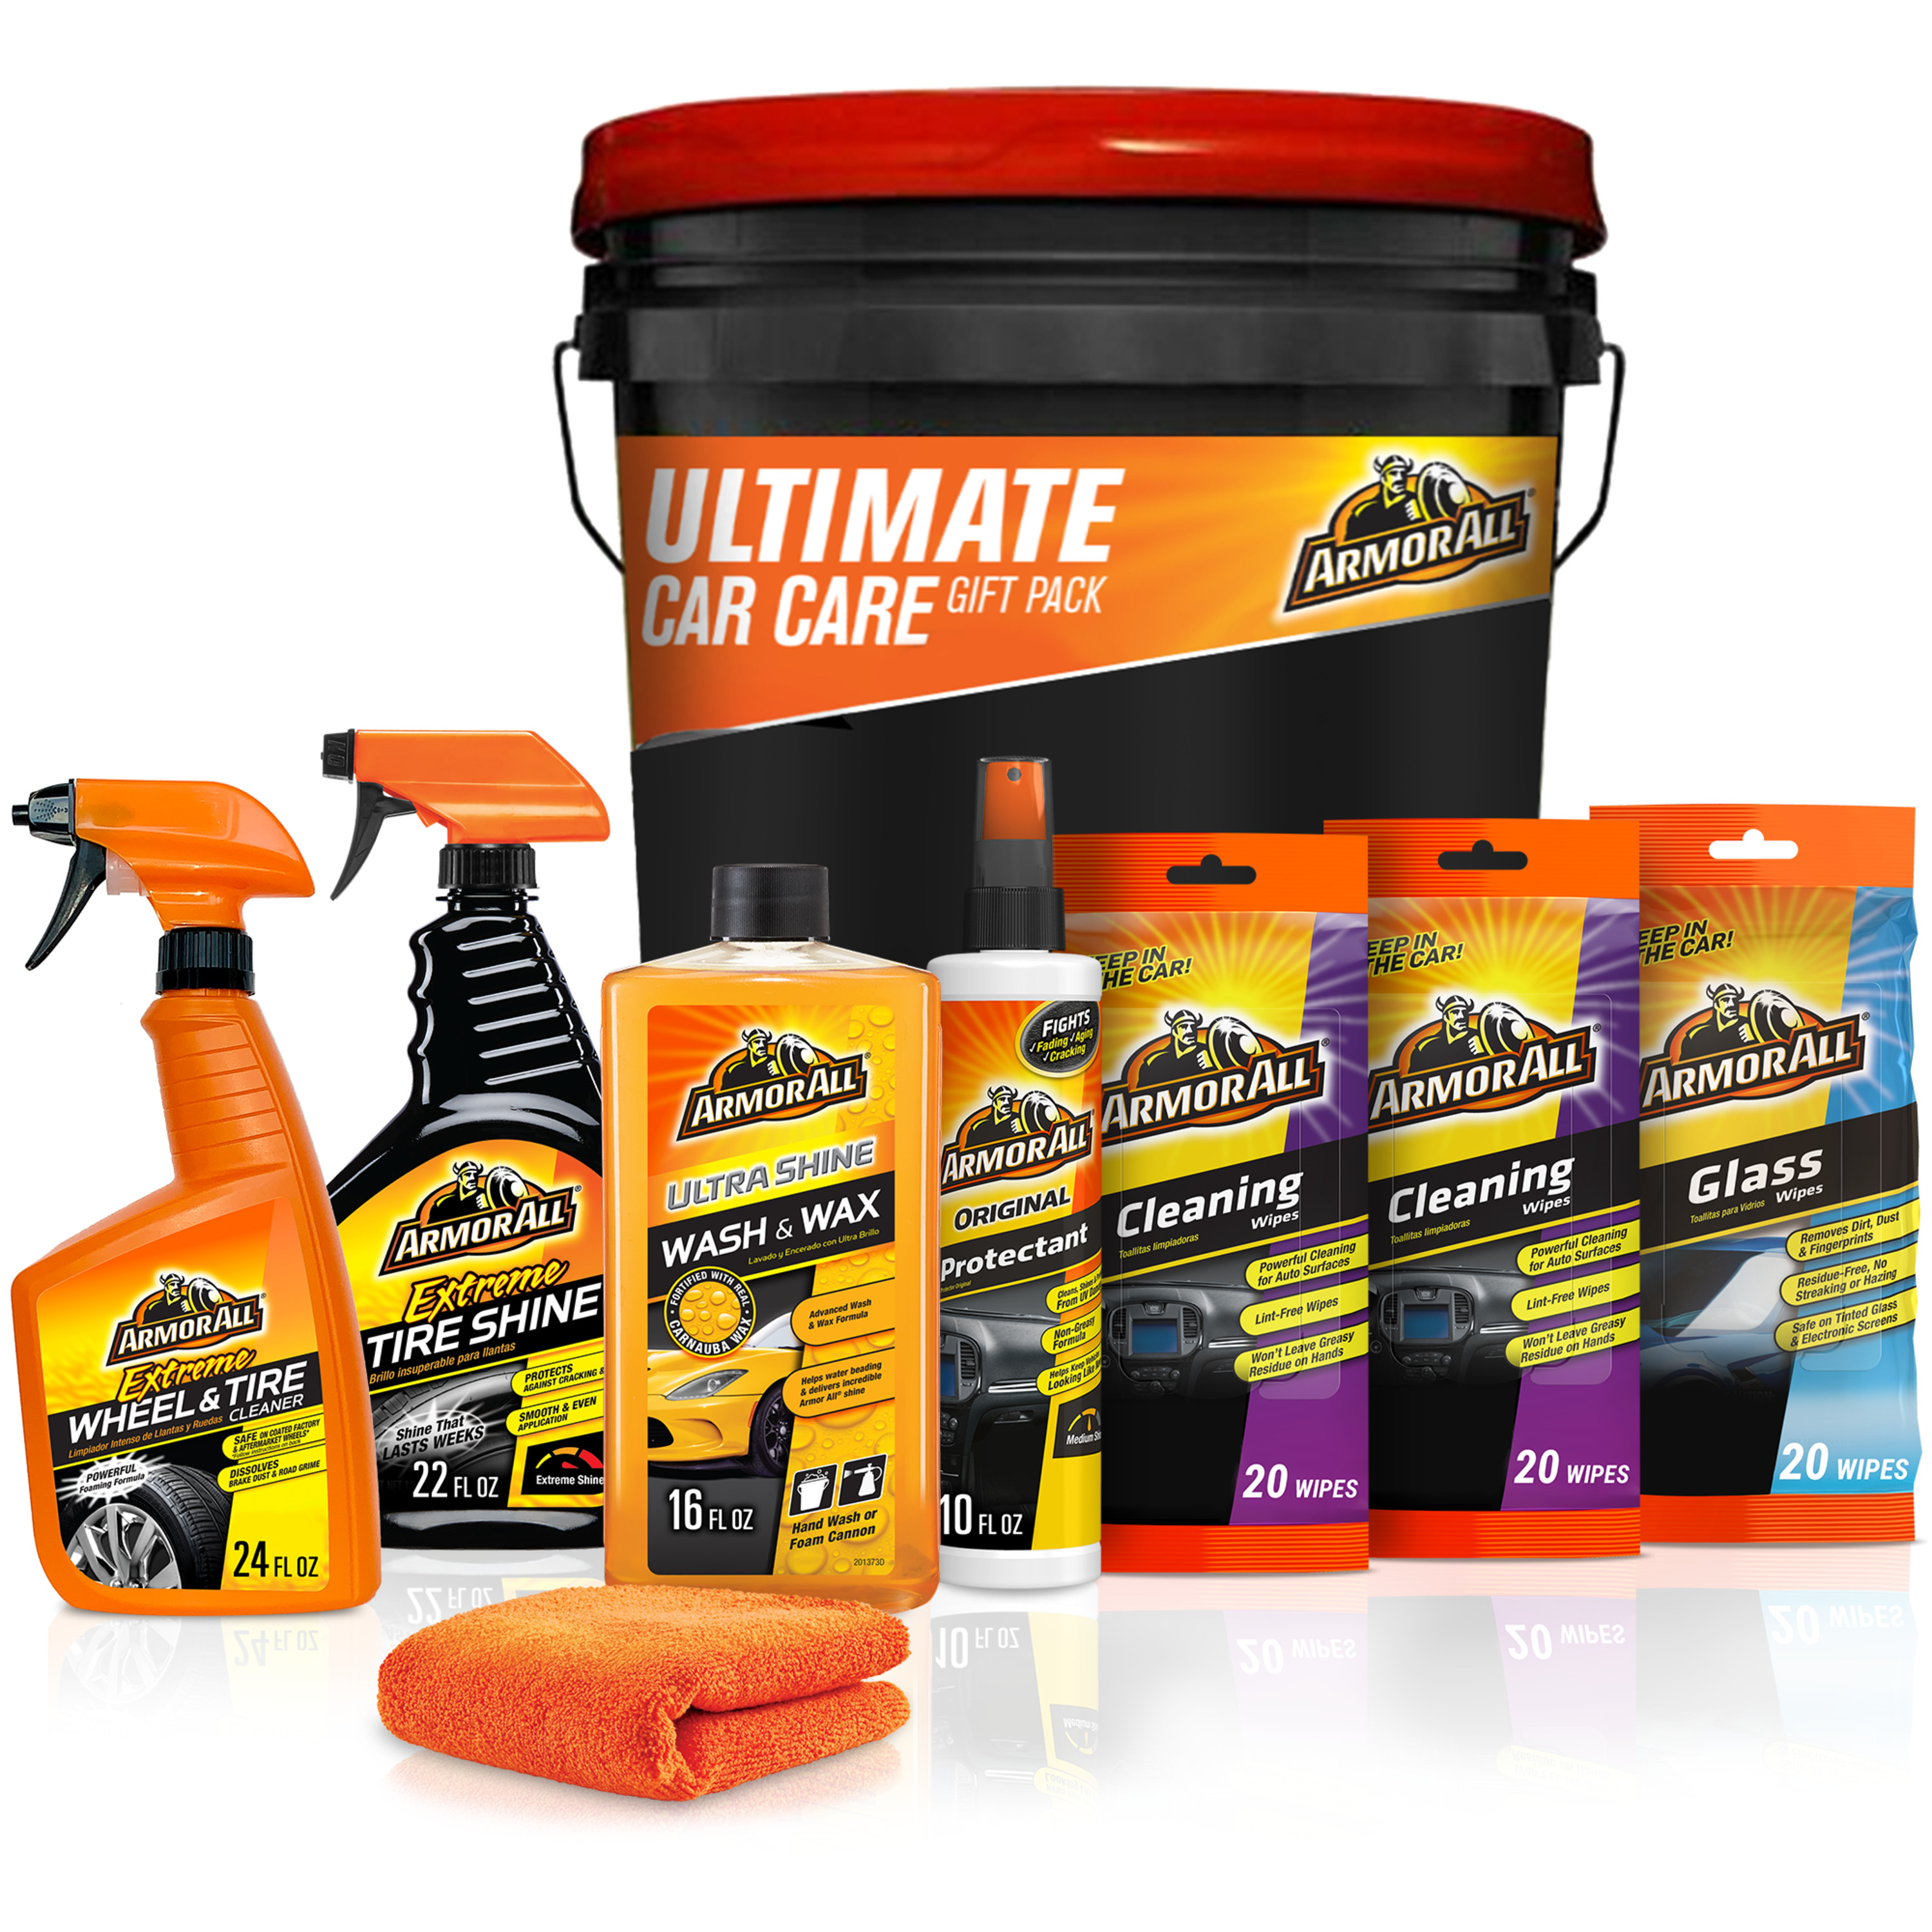 Armor All Ultimate Car Care Gift Set, Auto Cleaners, 10-Pieces - image 1 of 8